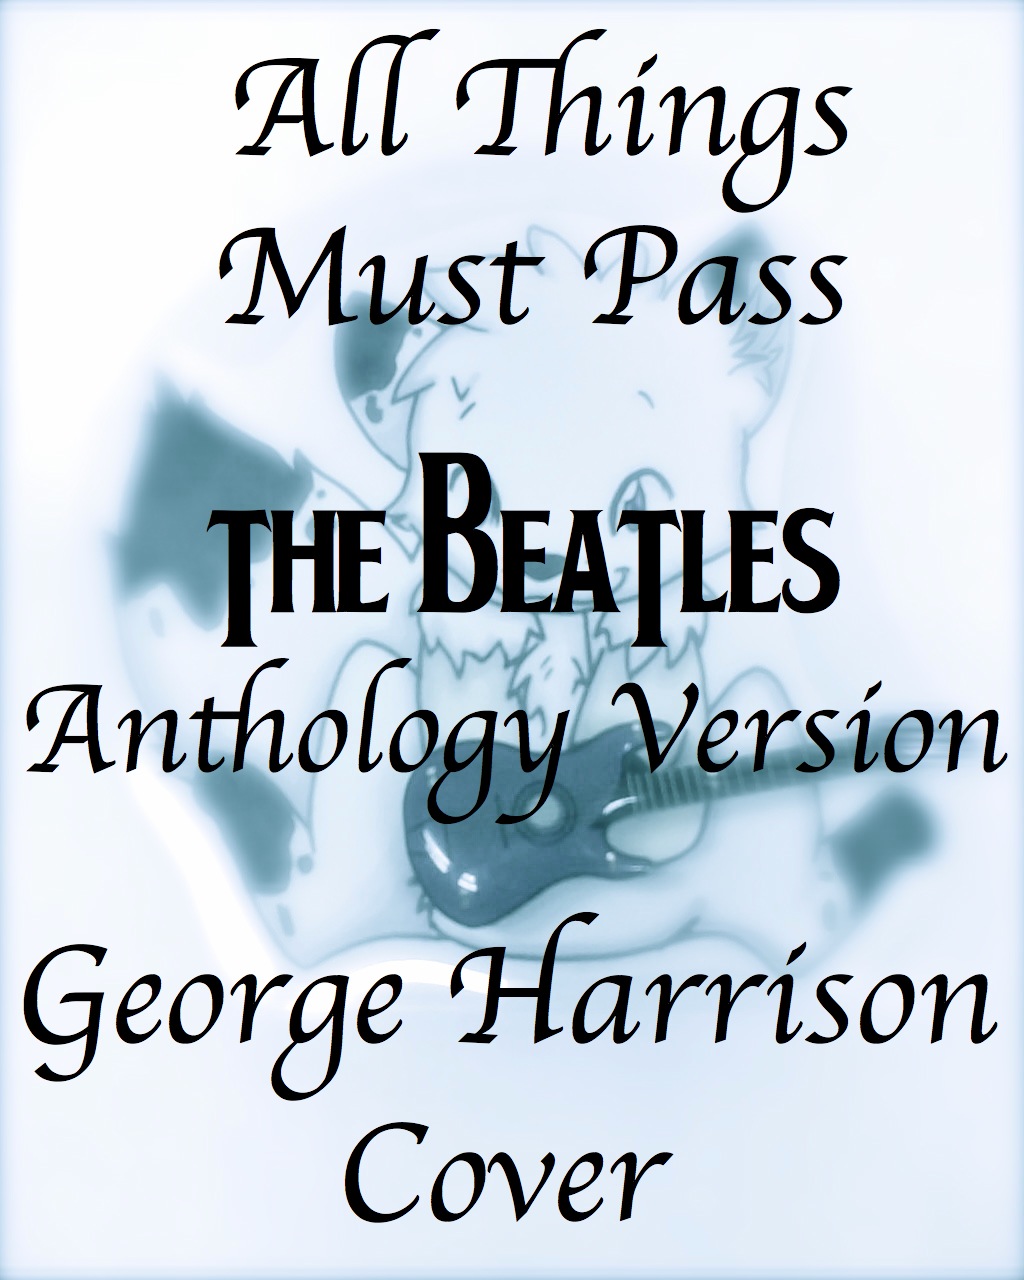 All Things Must Pass (George Harrison Cover)